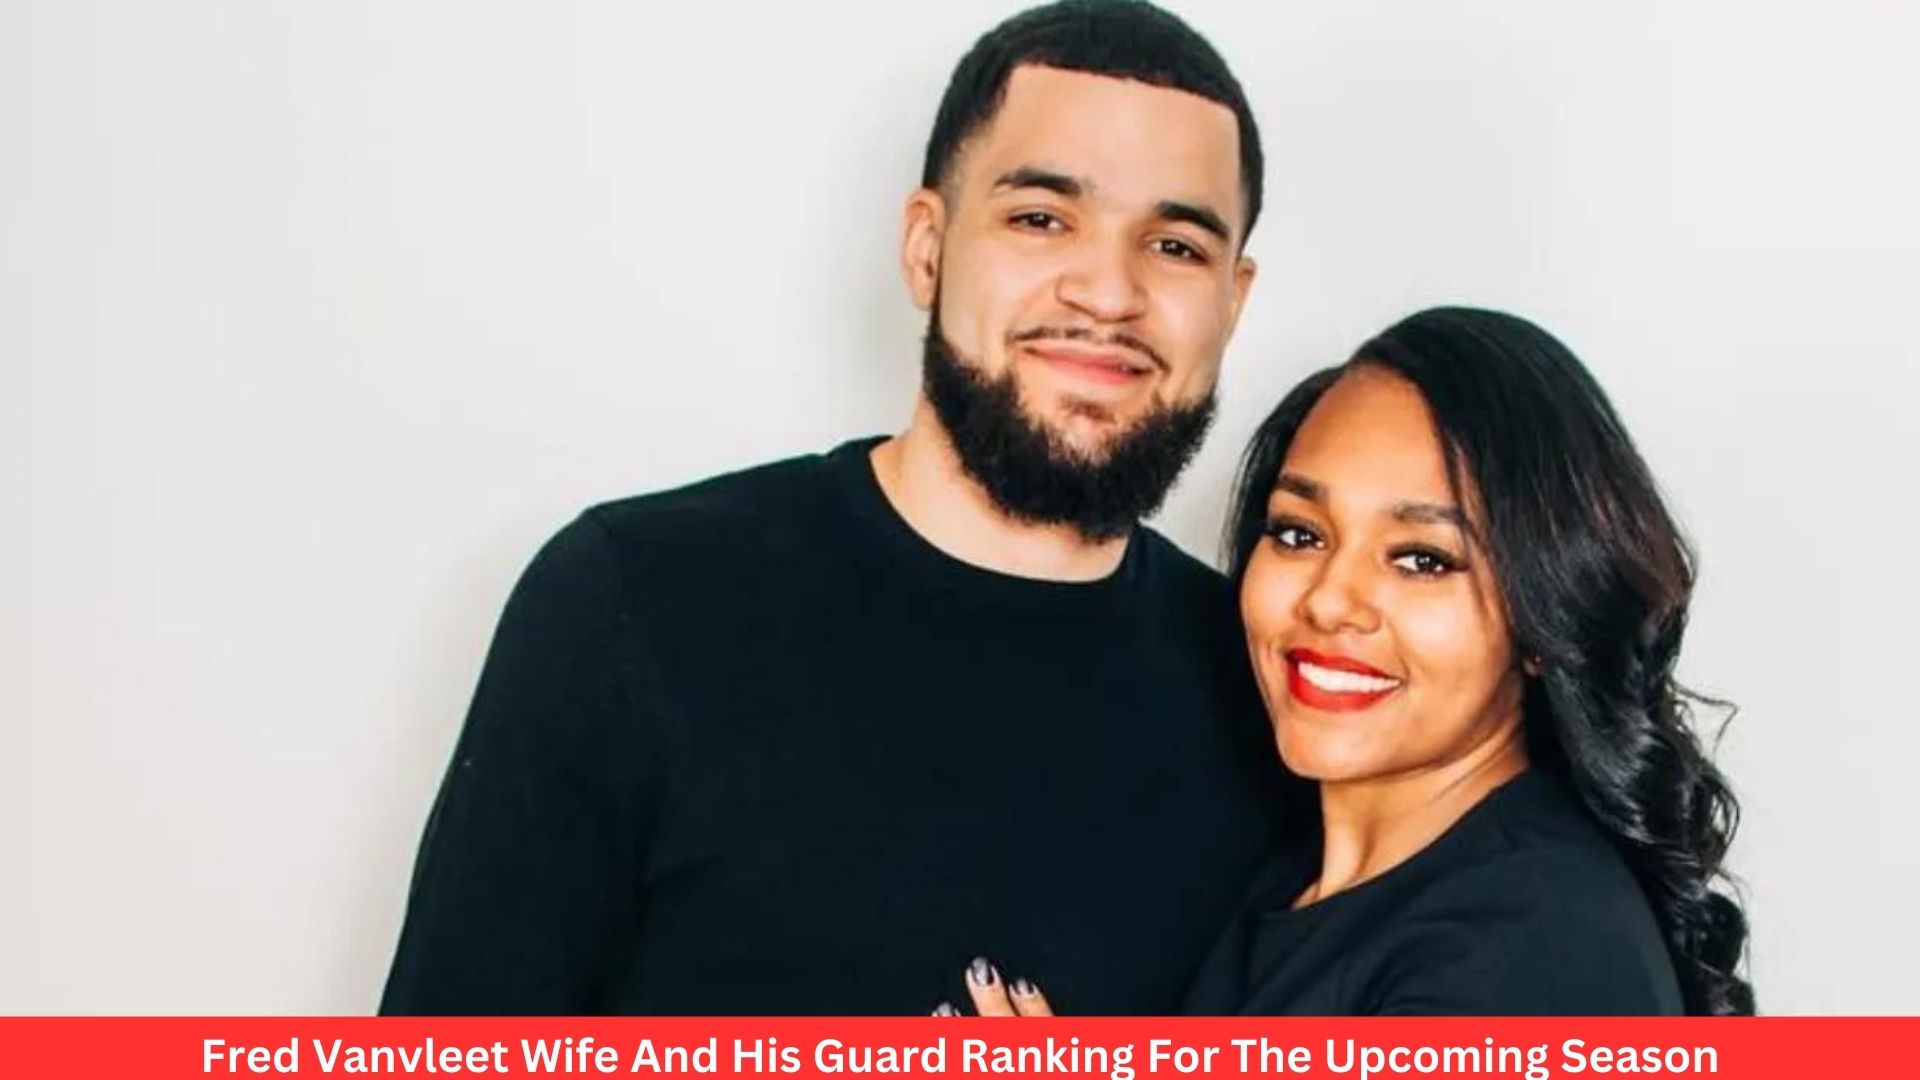 Fred Vanvleet Wife And His Guard Ranking For The Upcoming Season